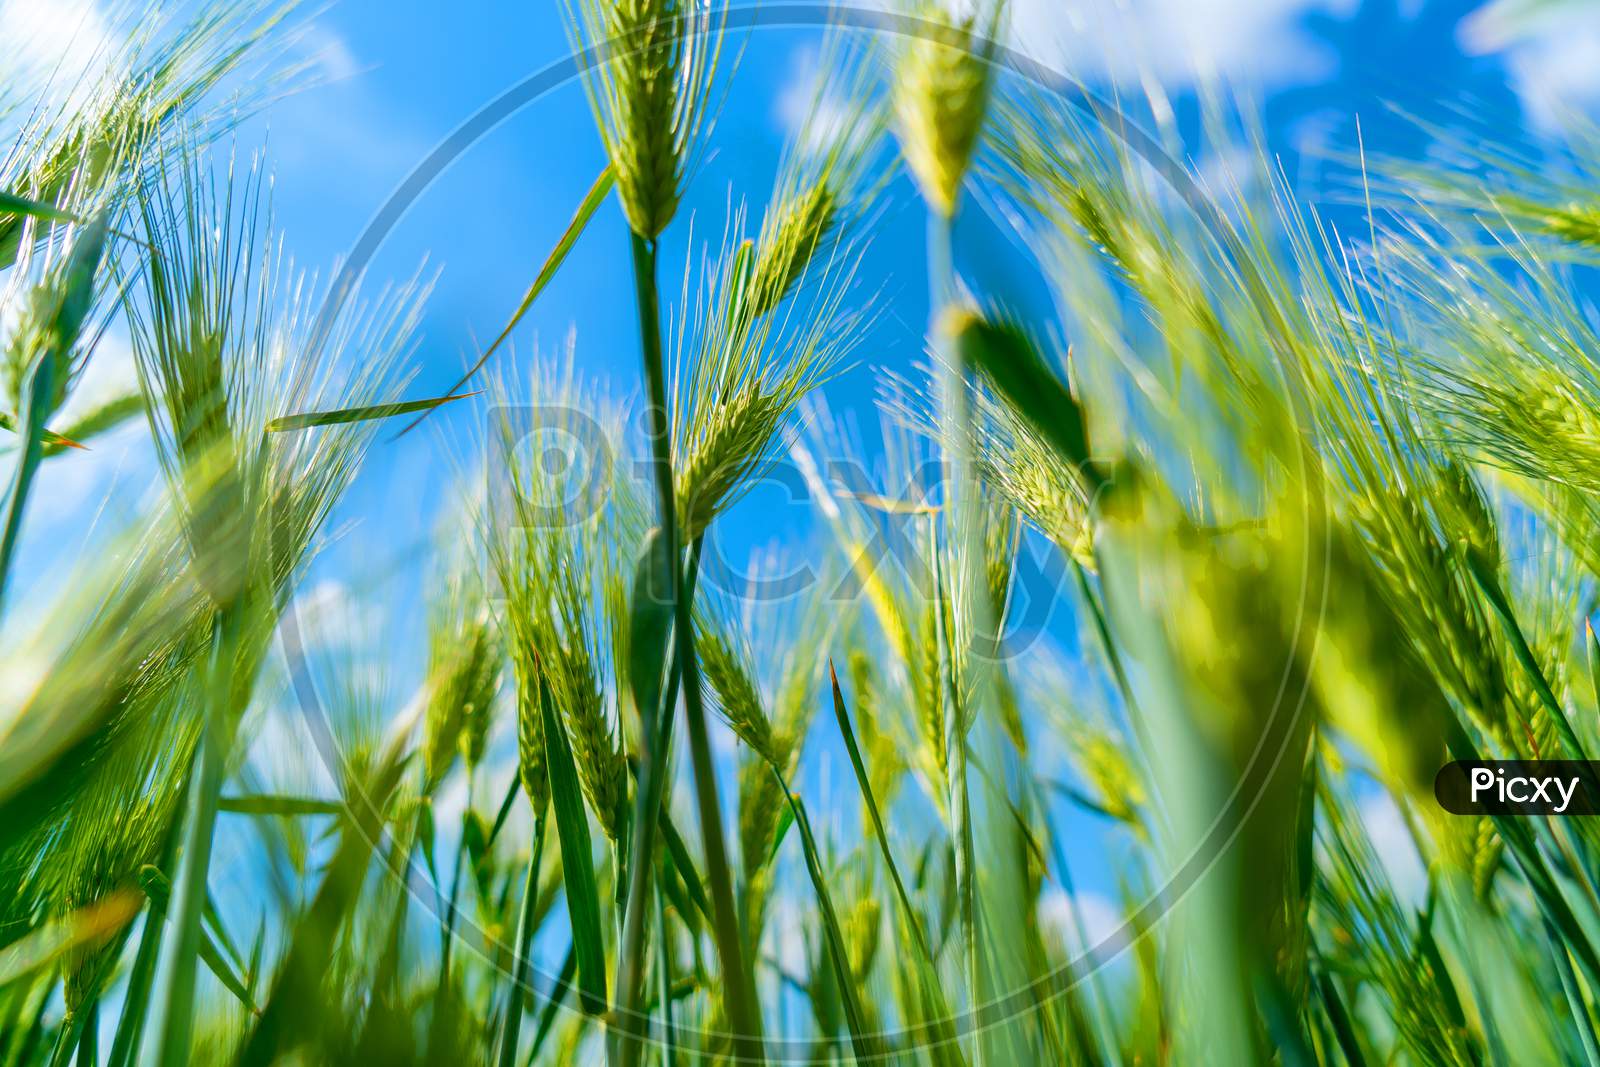 Ripening Bearded Barley On A Bright Summer Day Day. It Is A Member Of The Grass Family, Is A Major Cereal Grain Grown In Temperate Climates Globally.